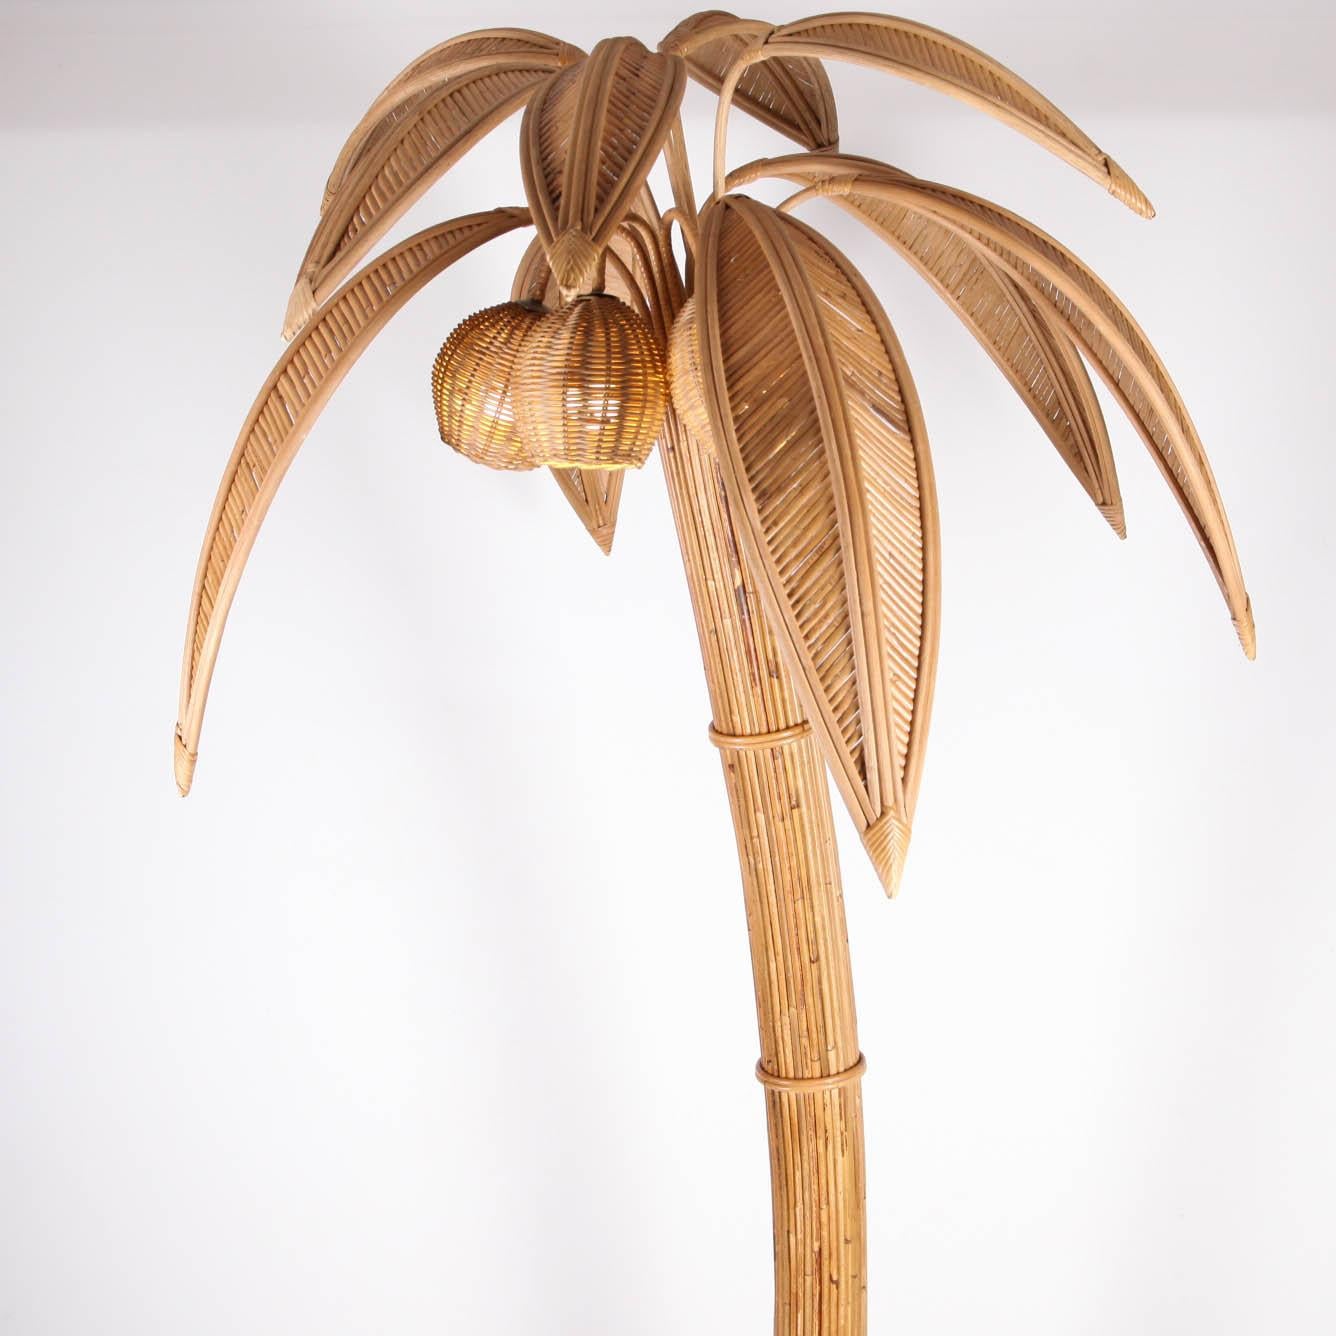 This Handmade rattan coconut tree floor lamp will transform any piece of your place to a warm tropical island vibe. Each comes with 3 bulbs in the coconuts and 10 removable/ adjustable leaves. In the style of Mario Lopez Torres.
*Available in pair*.